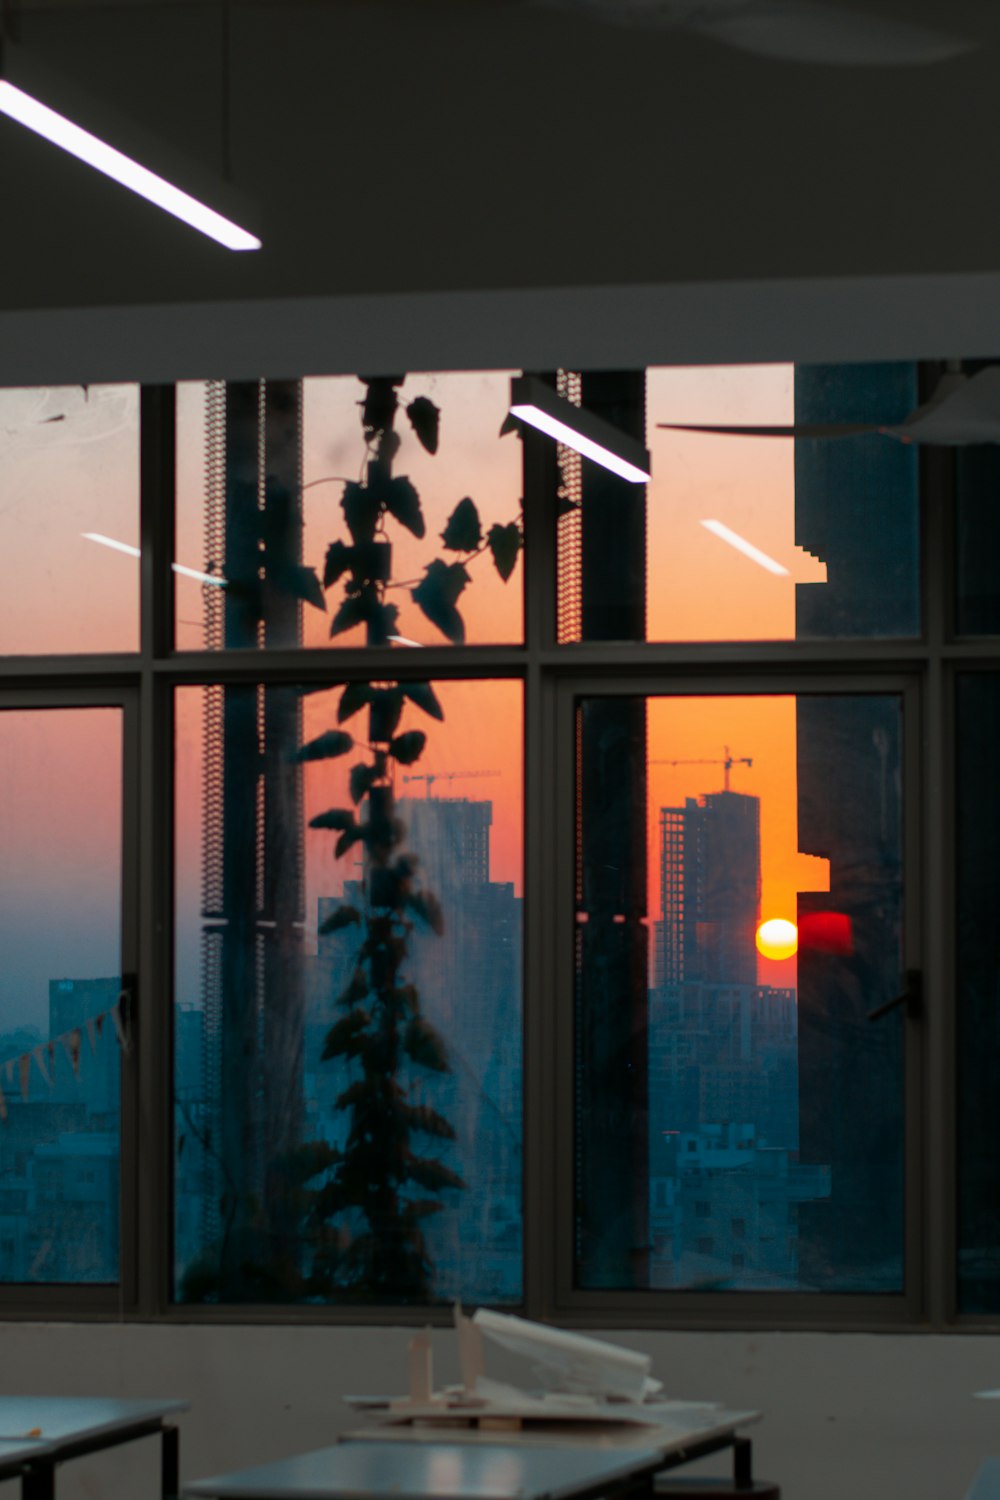 a window view of a city at sunset